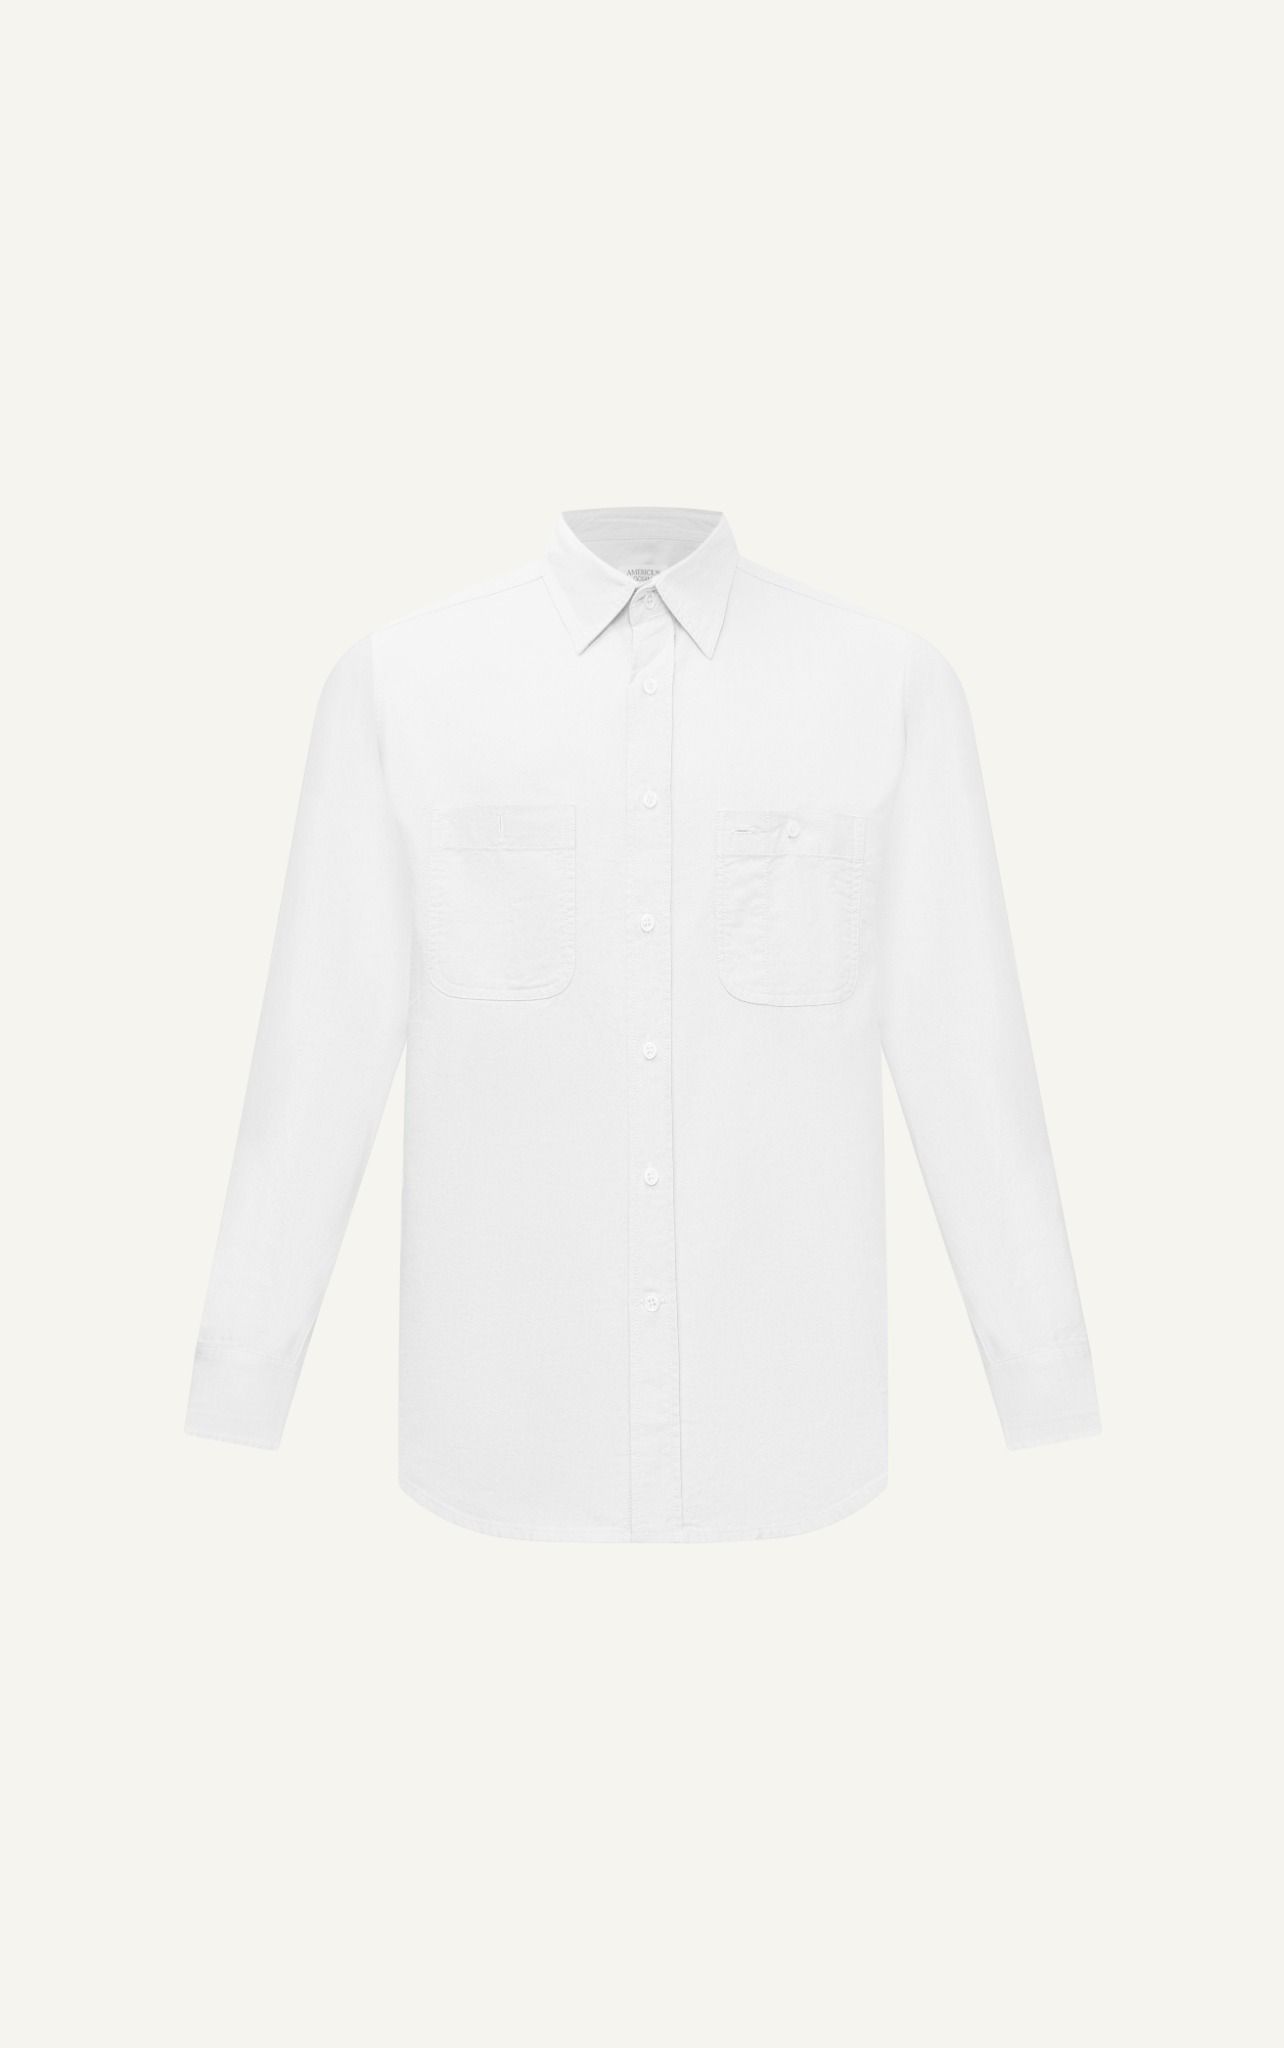  AG016 PREMIUM REGULAR FIT NEW OXFORD SHIRT WITH POCKETS - WHITE 